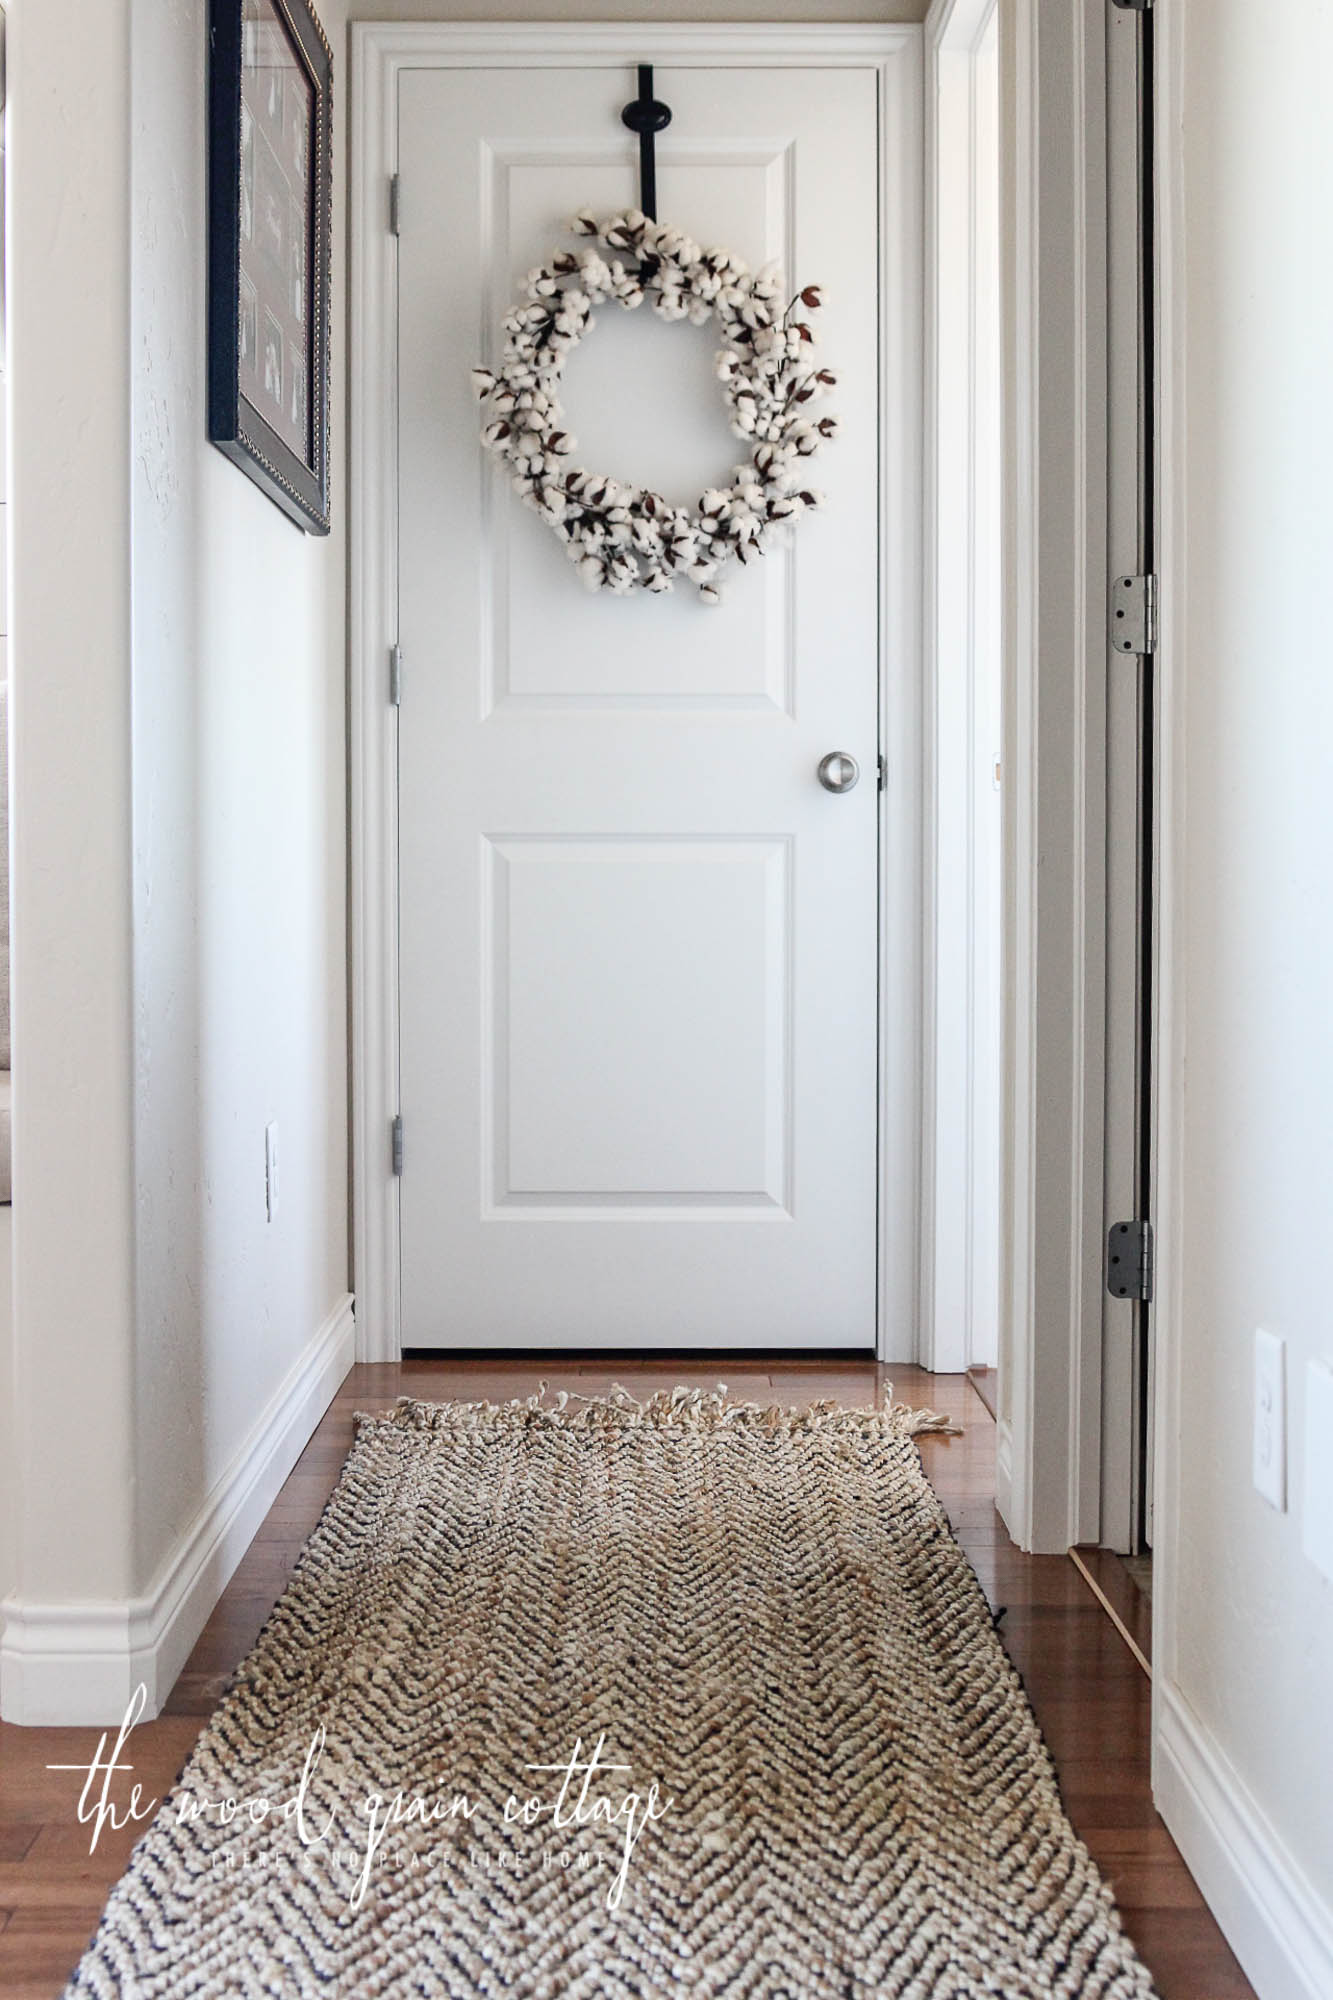 https://www.thewoodgraincottage.com/wp-content/uploads/2016/02/New-Hallway-Rug-by-The-Wood-Grain-Cottage-1.jpg